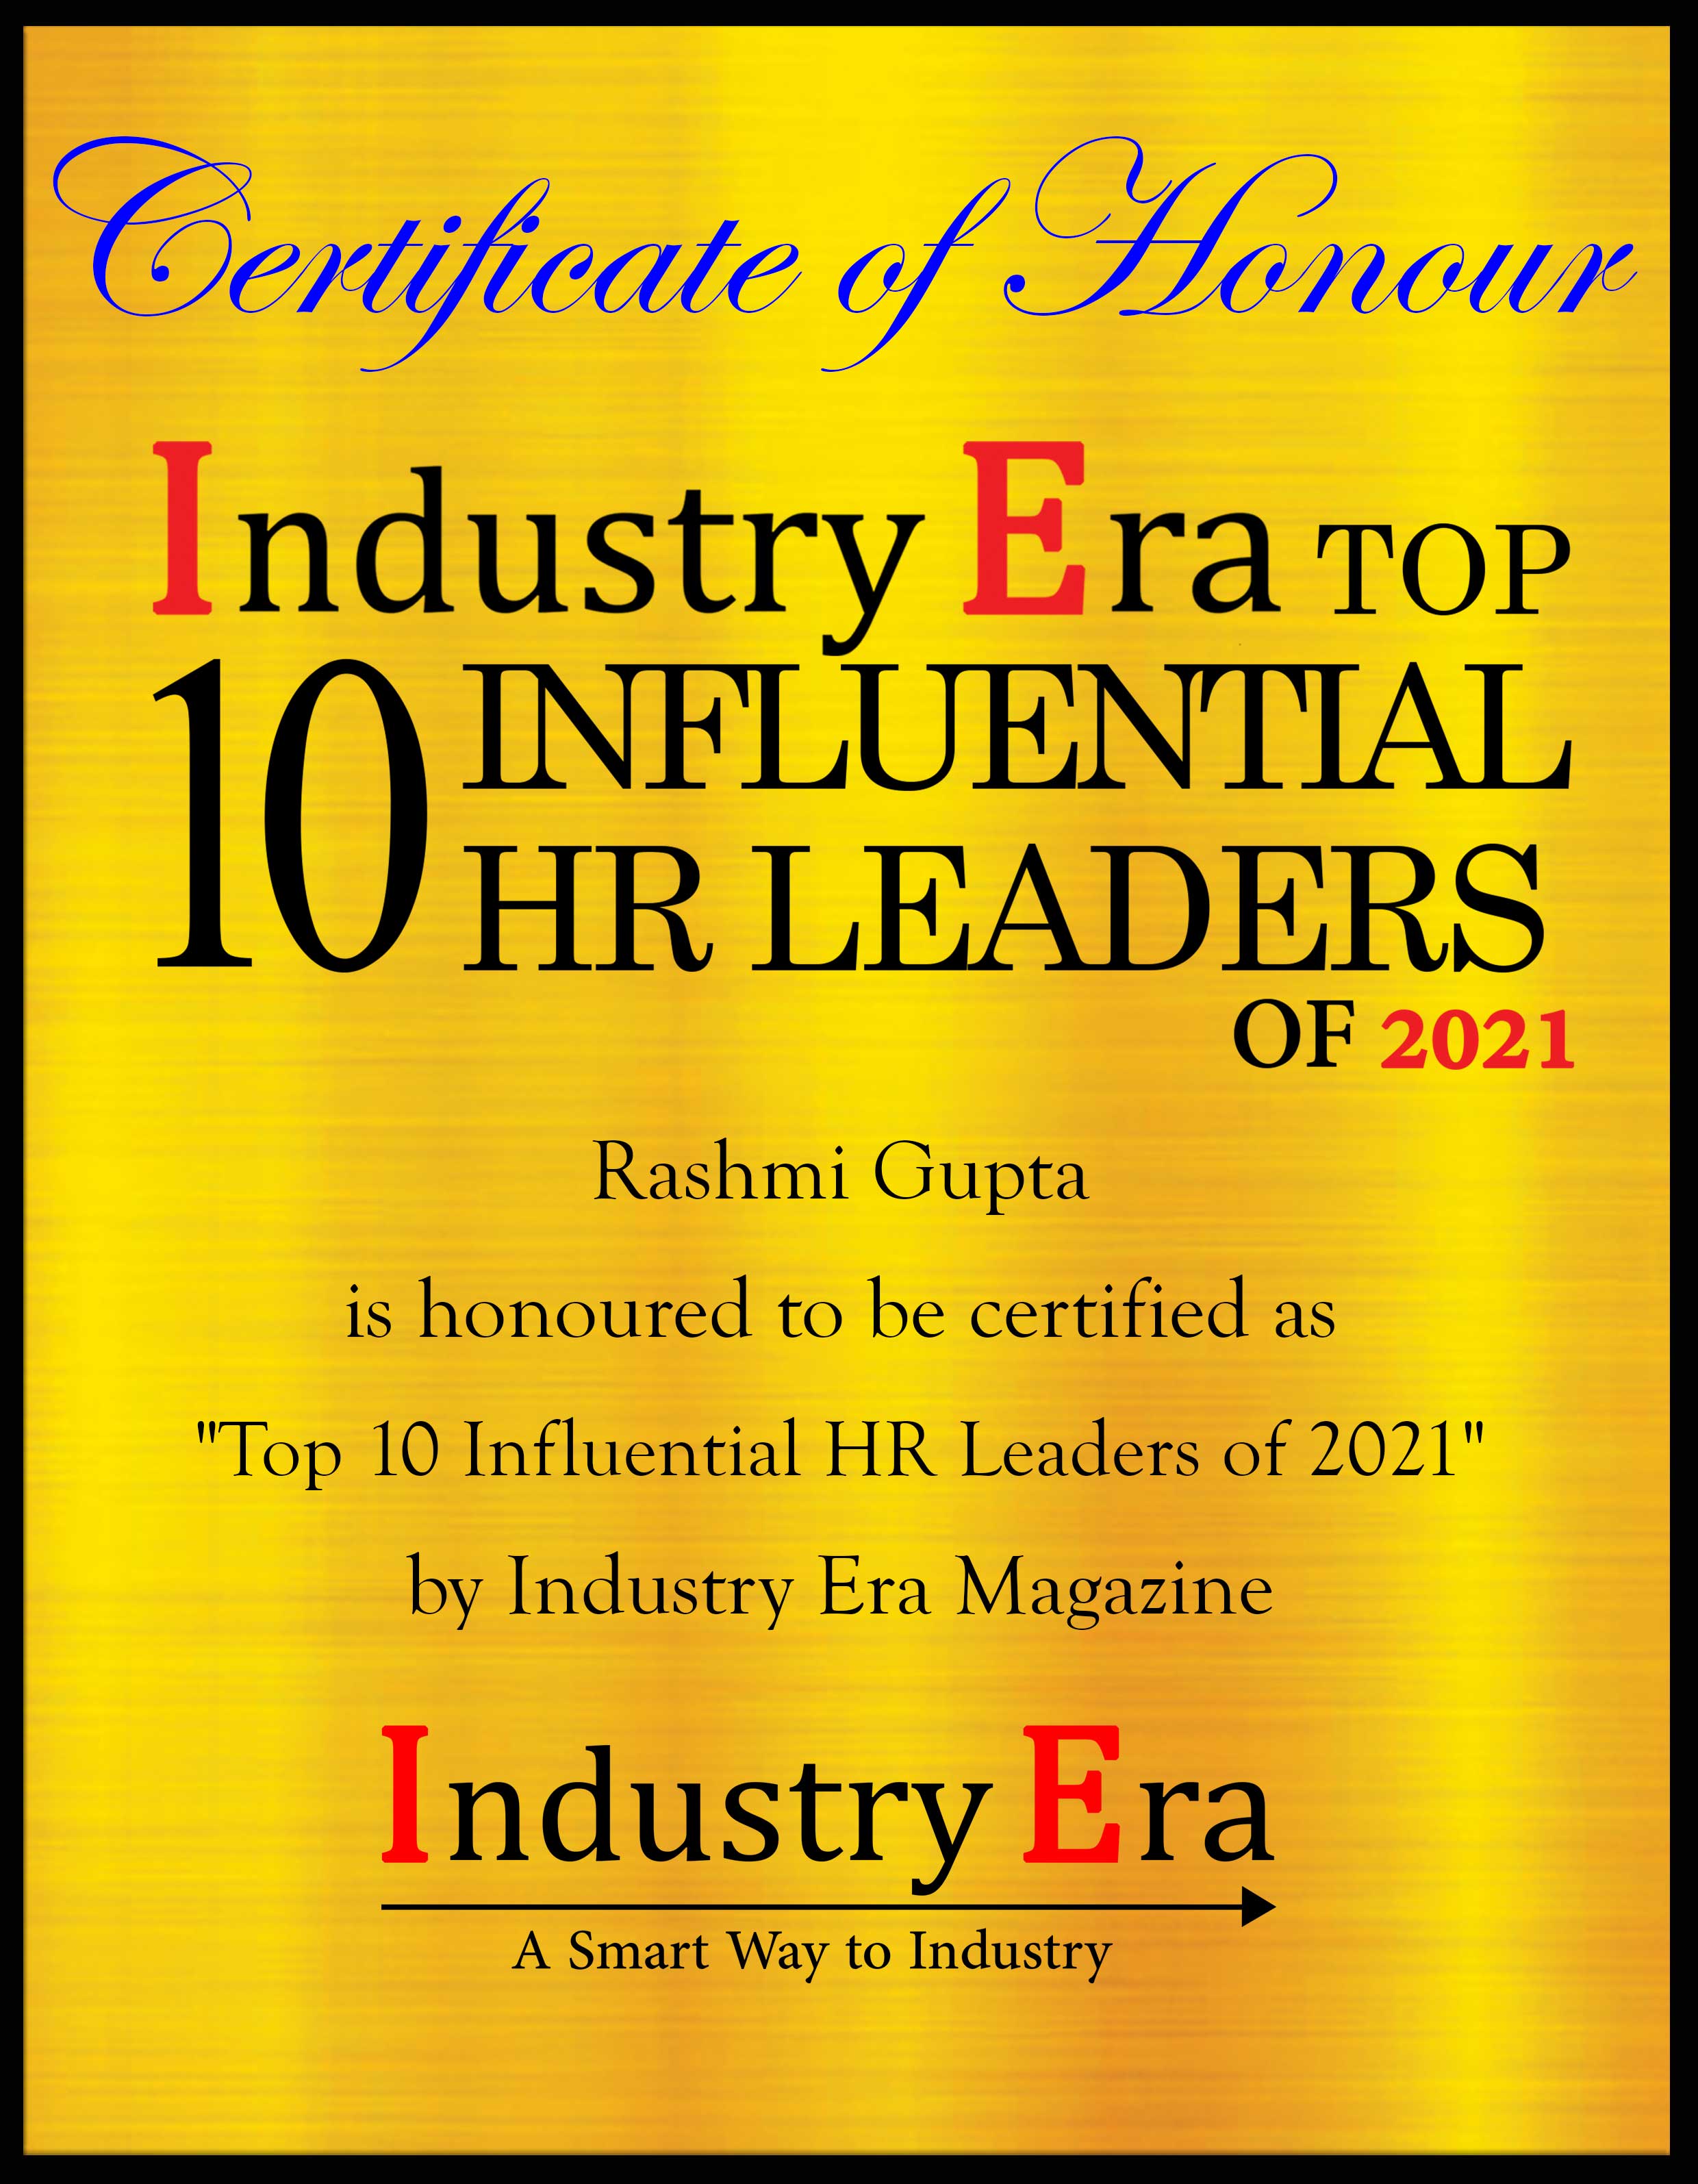 Rashmi Gupta, Chief Human Resources Officer of PRO Unlimited Certificate